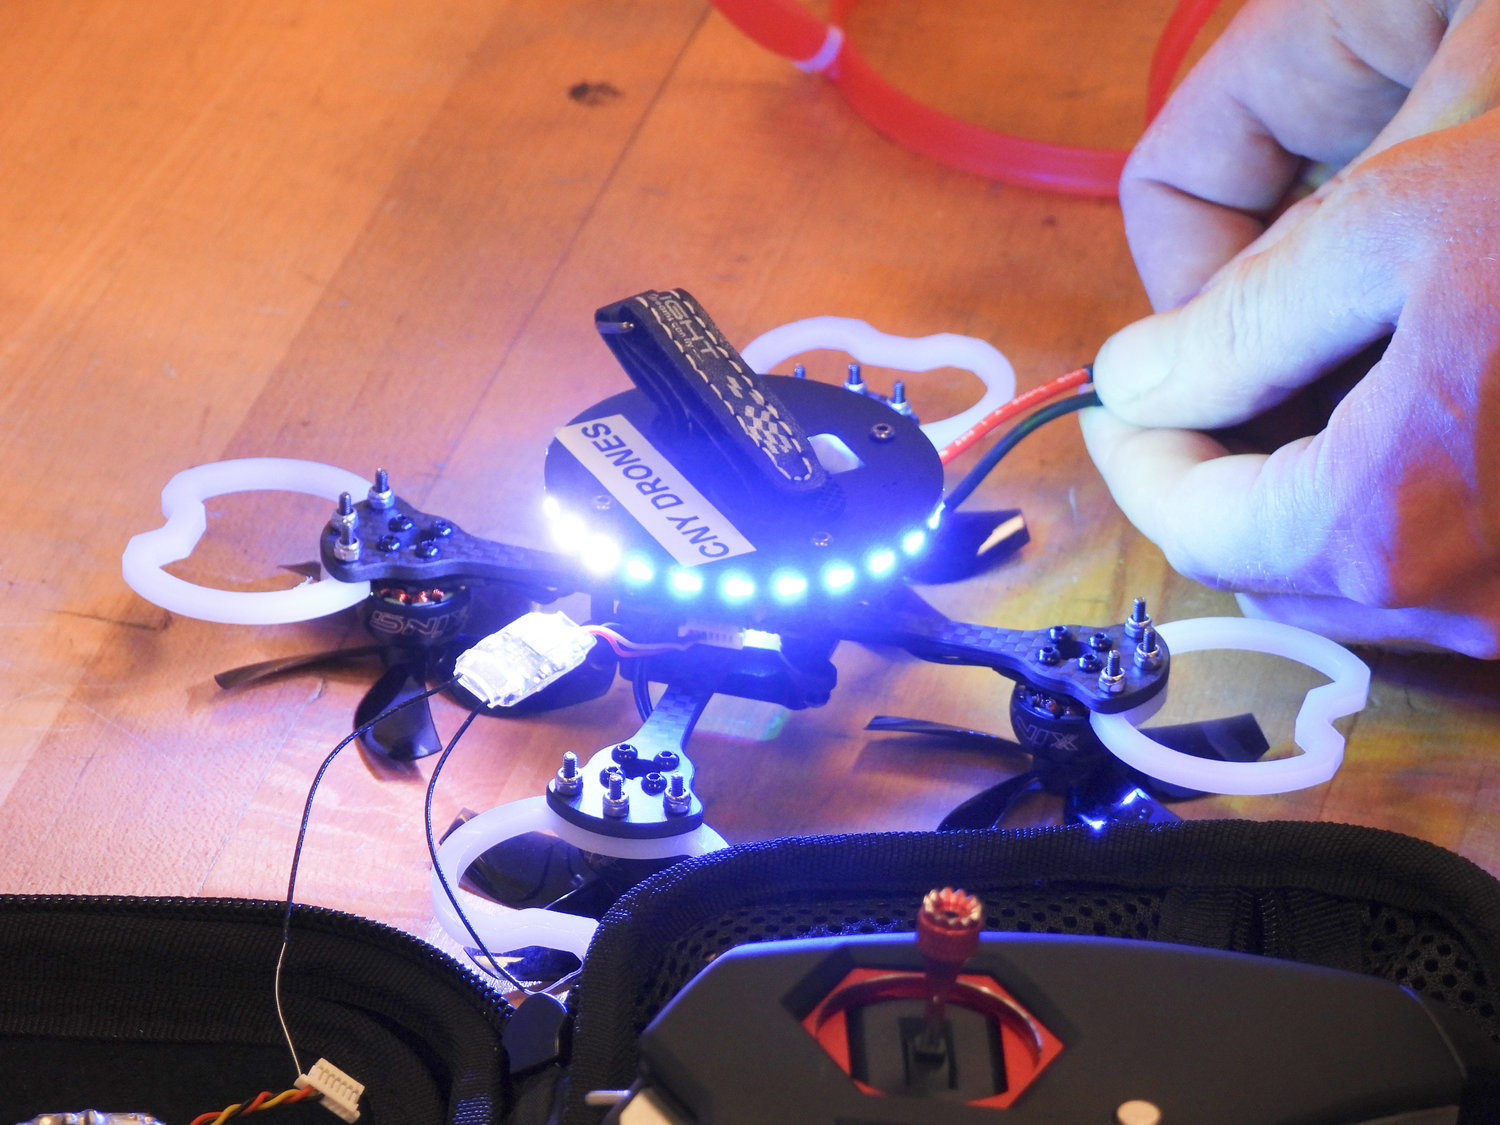 One of the quadcopter drones owned by CNY Drones is turned on